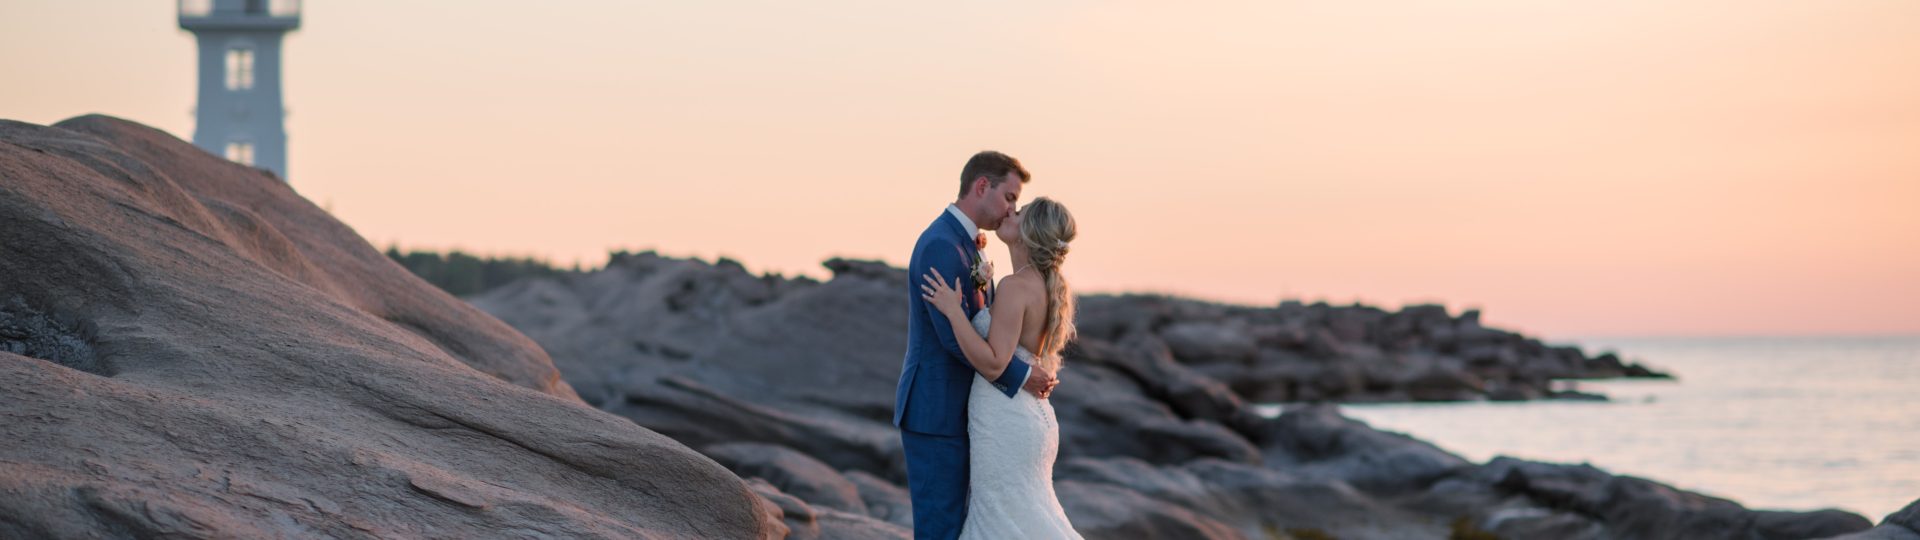 Say your vows on the breathtaking coast of the Northumberland Strait.